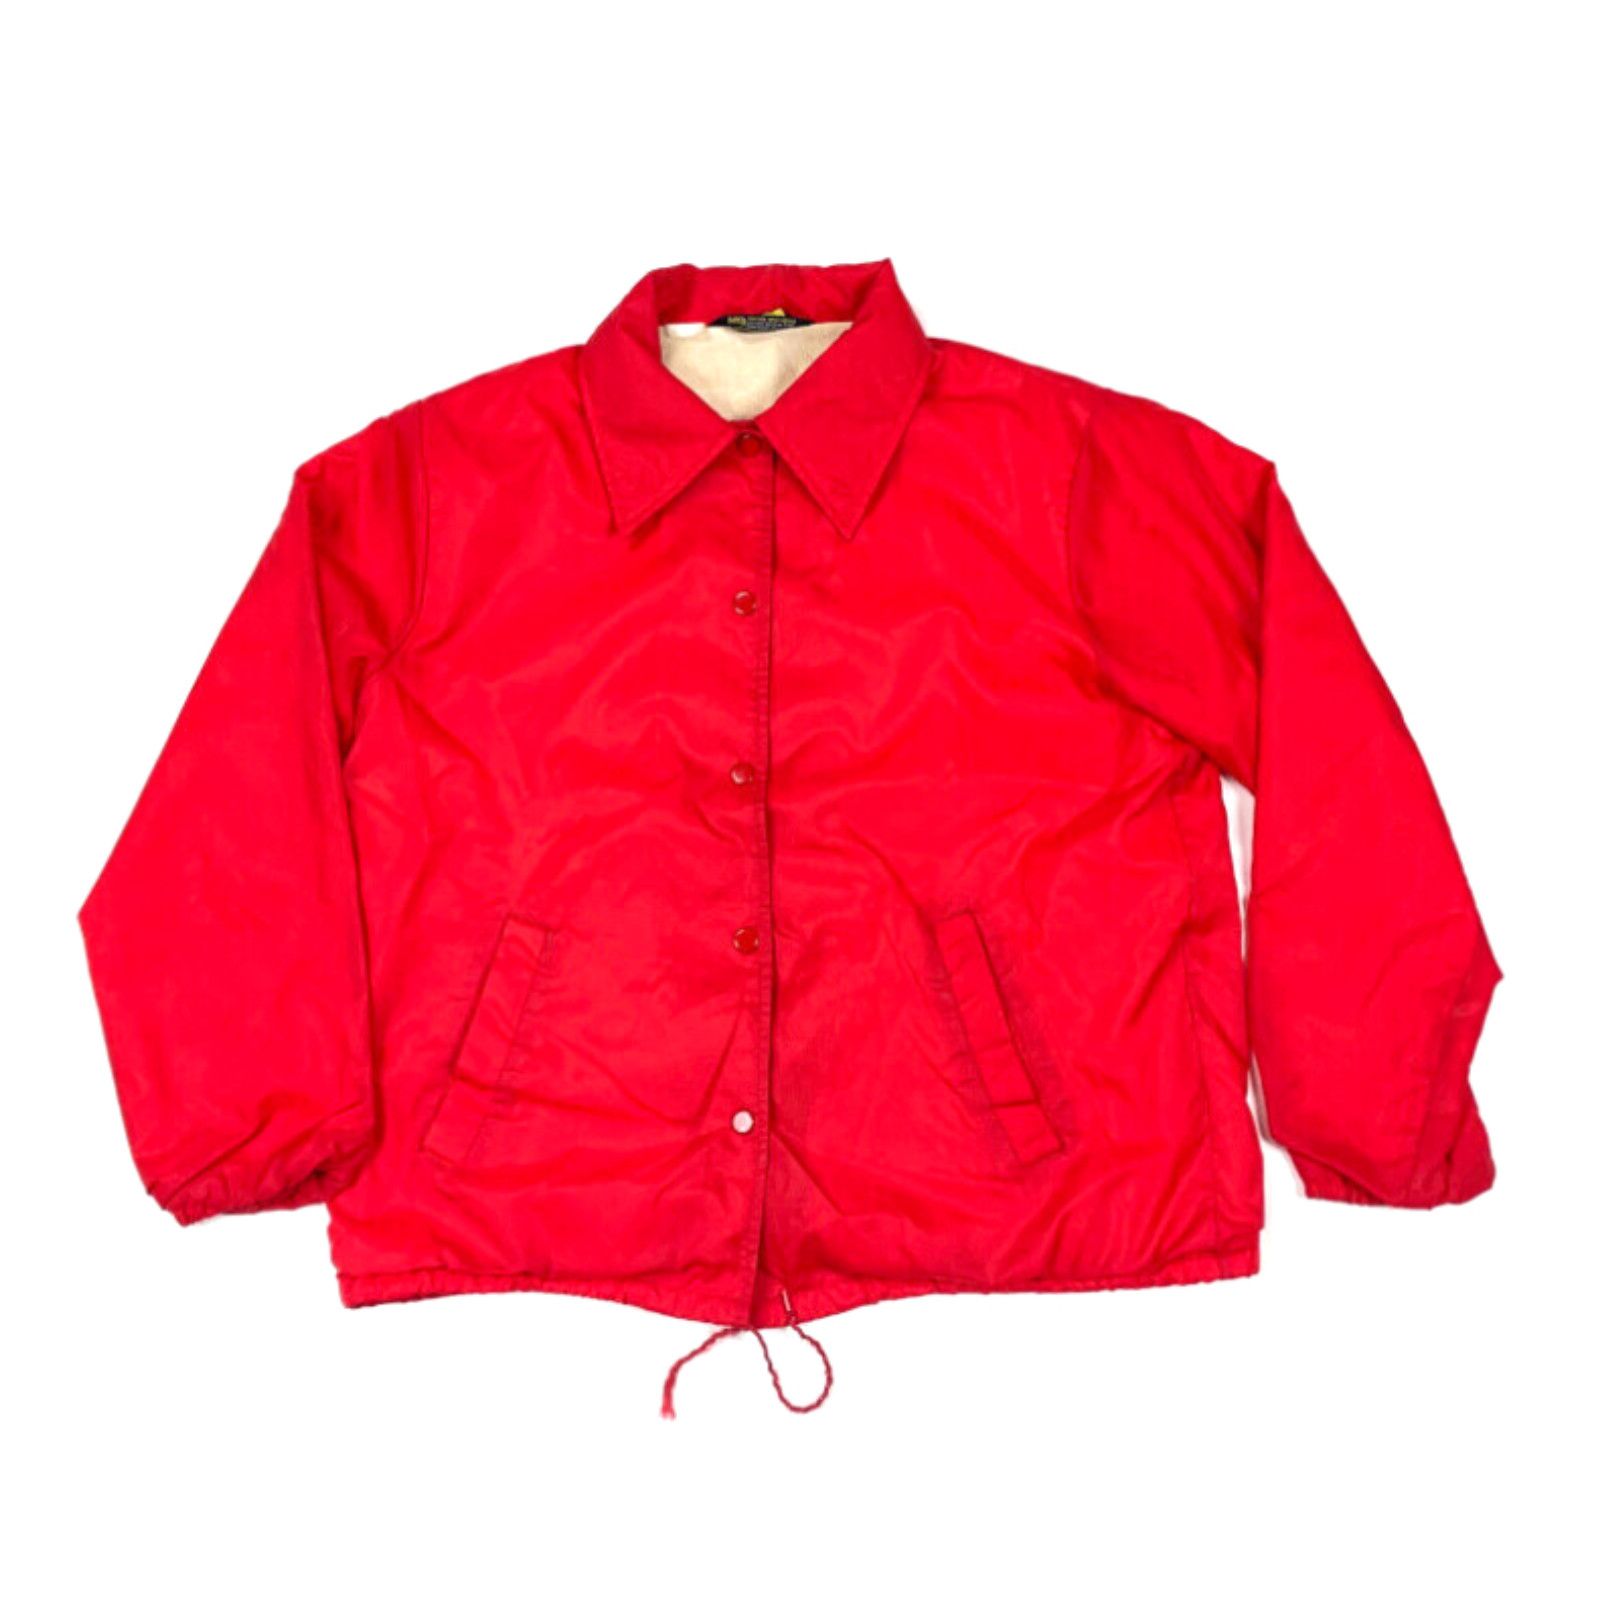 Vintage VTG 70s 80s MG JCPenney Red Nylon Windbreaker Jacket Lined Prep Classic Retro L Size L / US 10 / IT 46 - 1 Preview